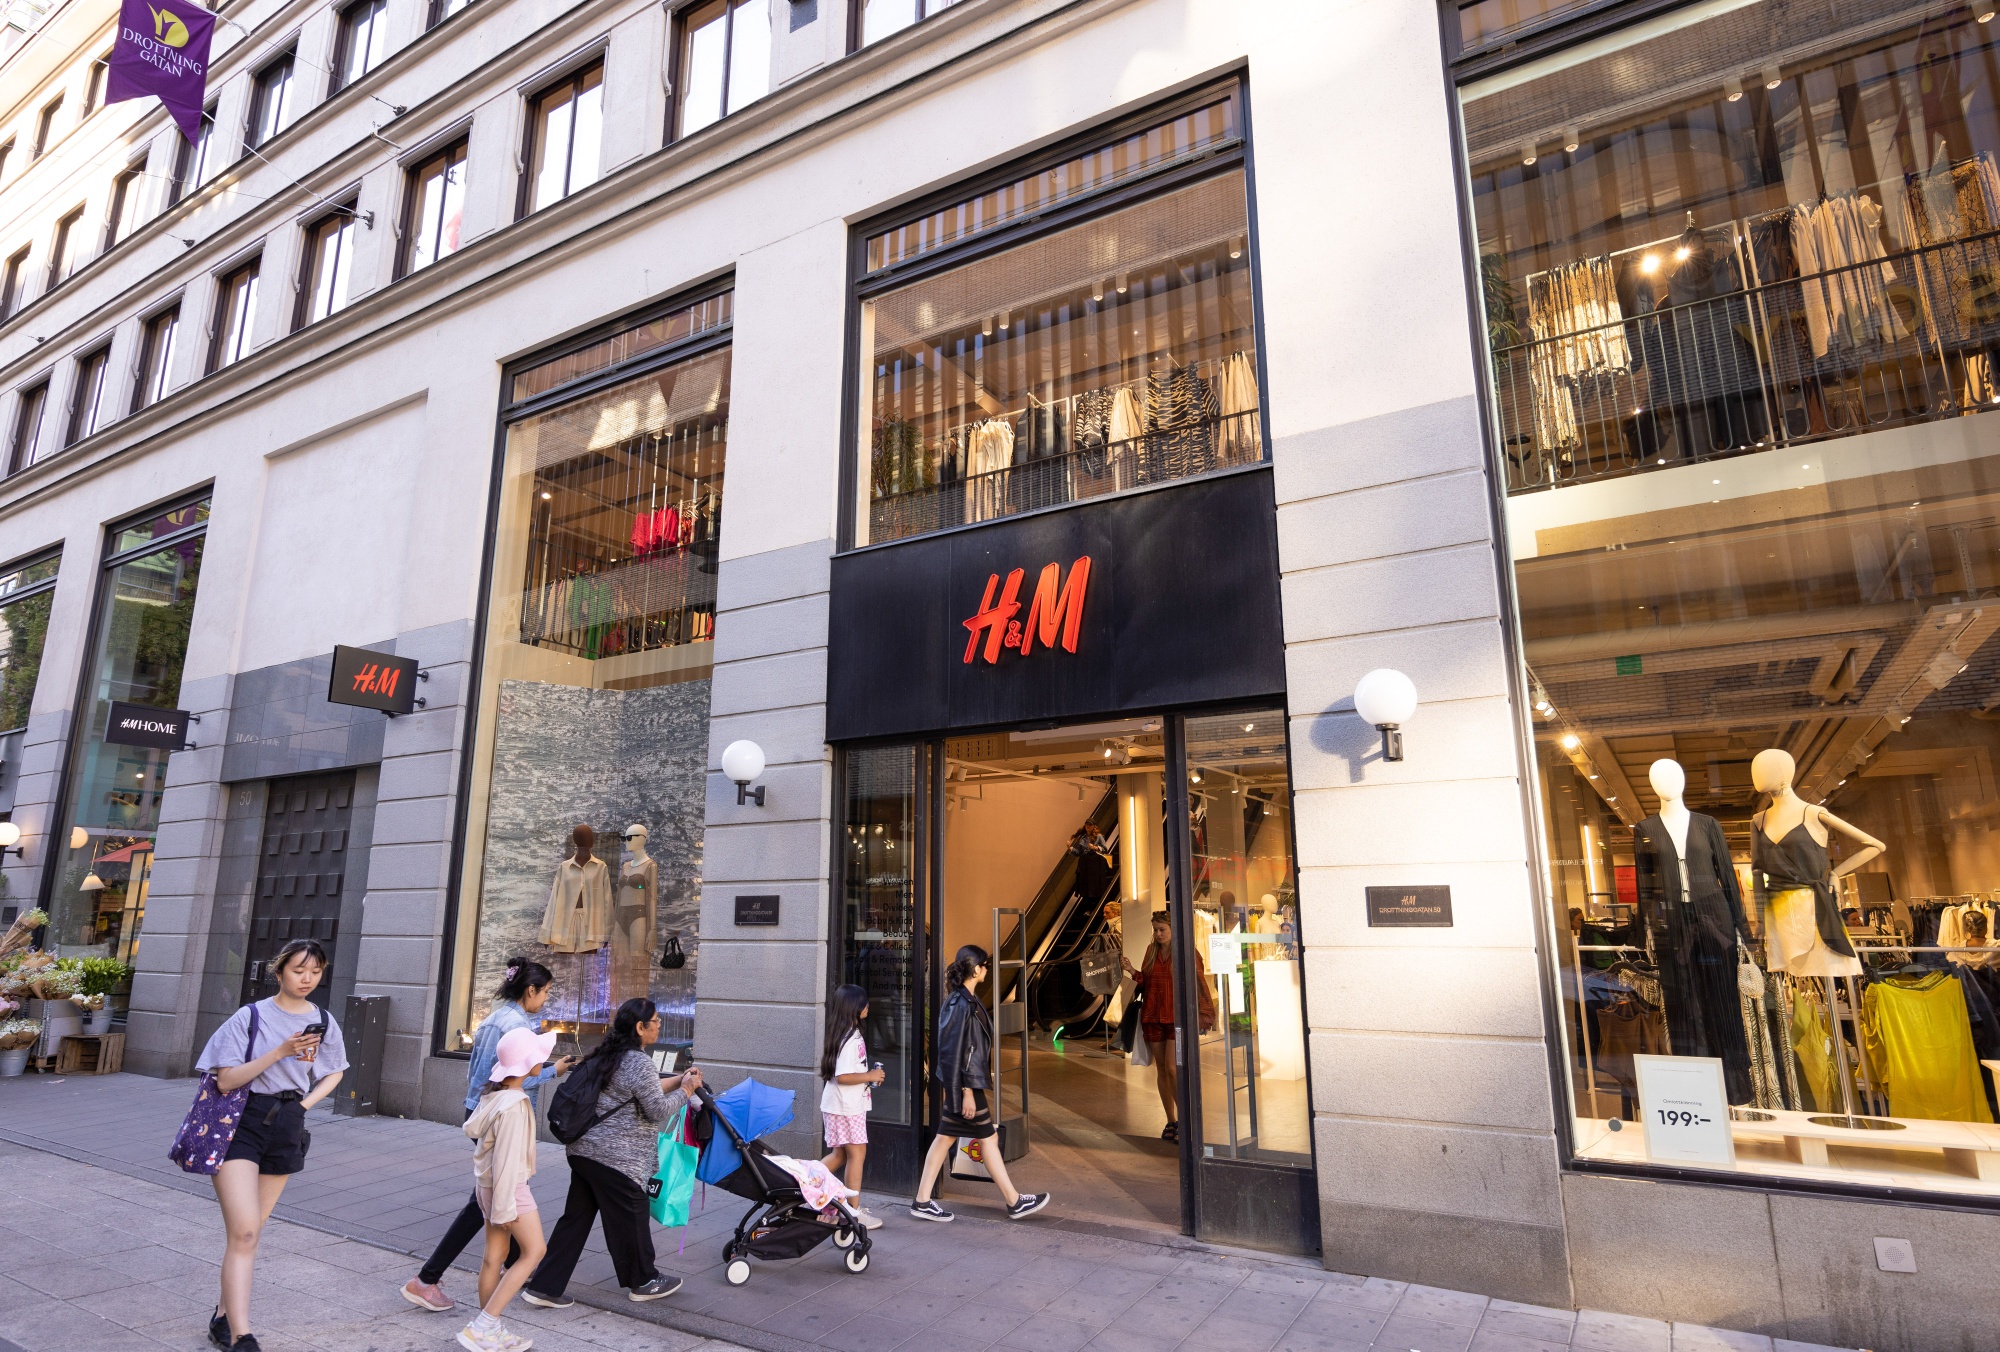 Fashion giant H&M Group explores greener transport options